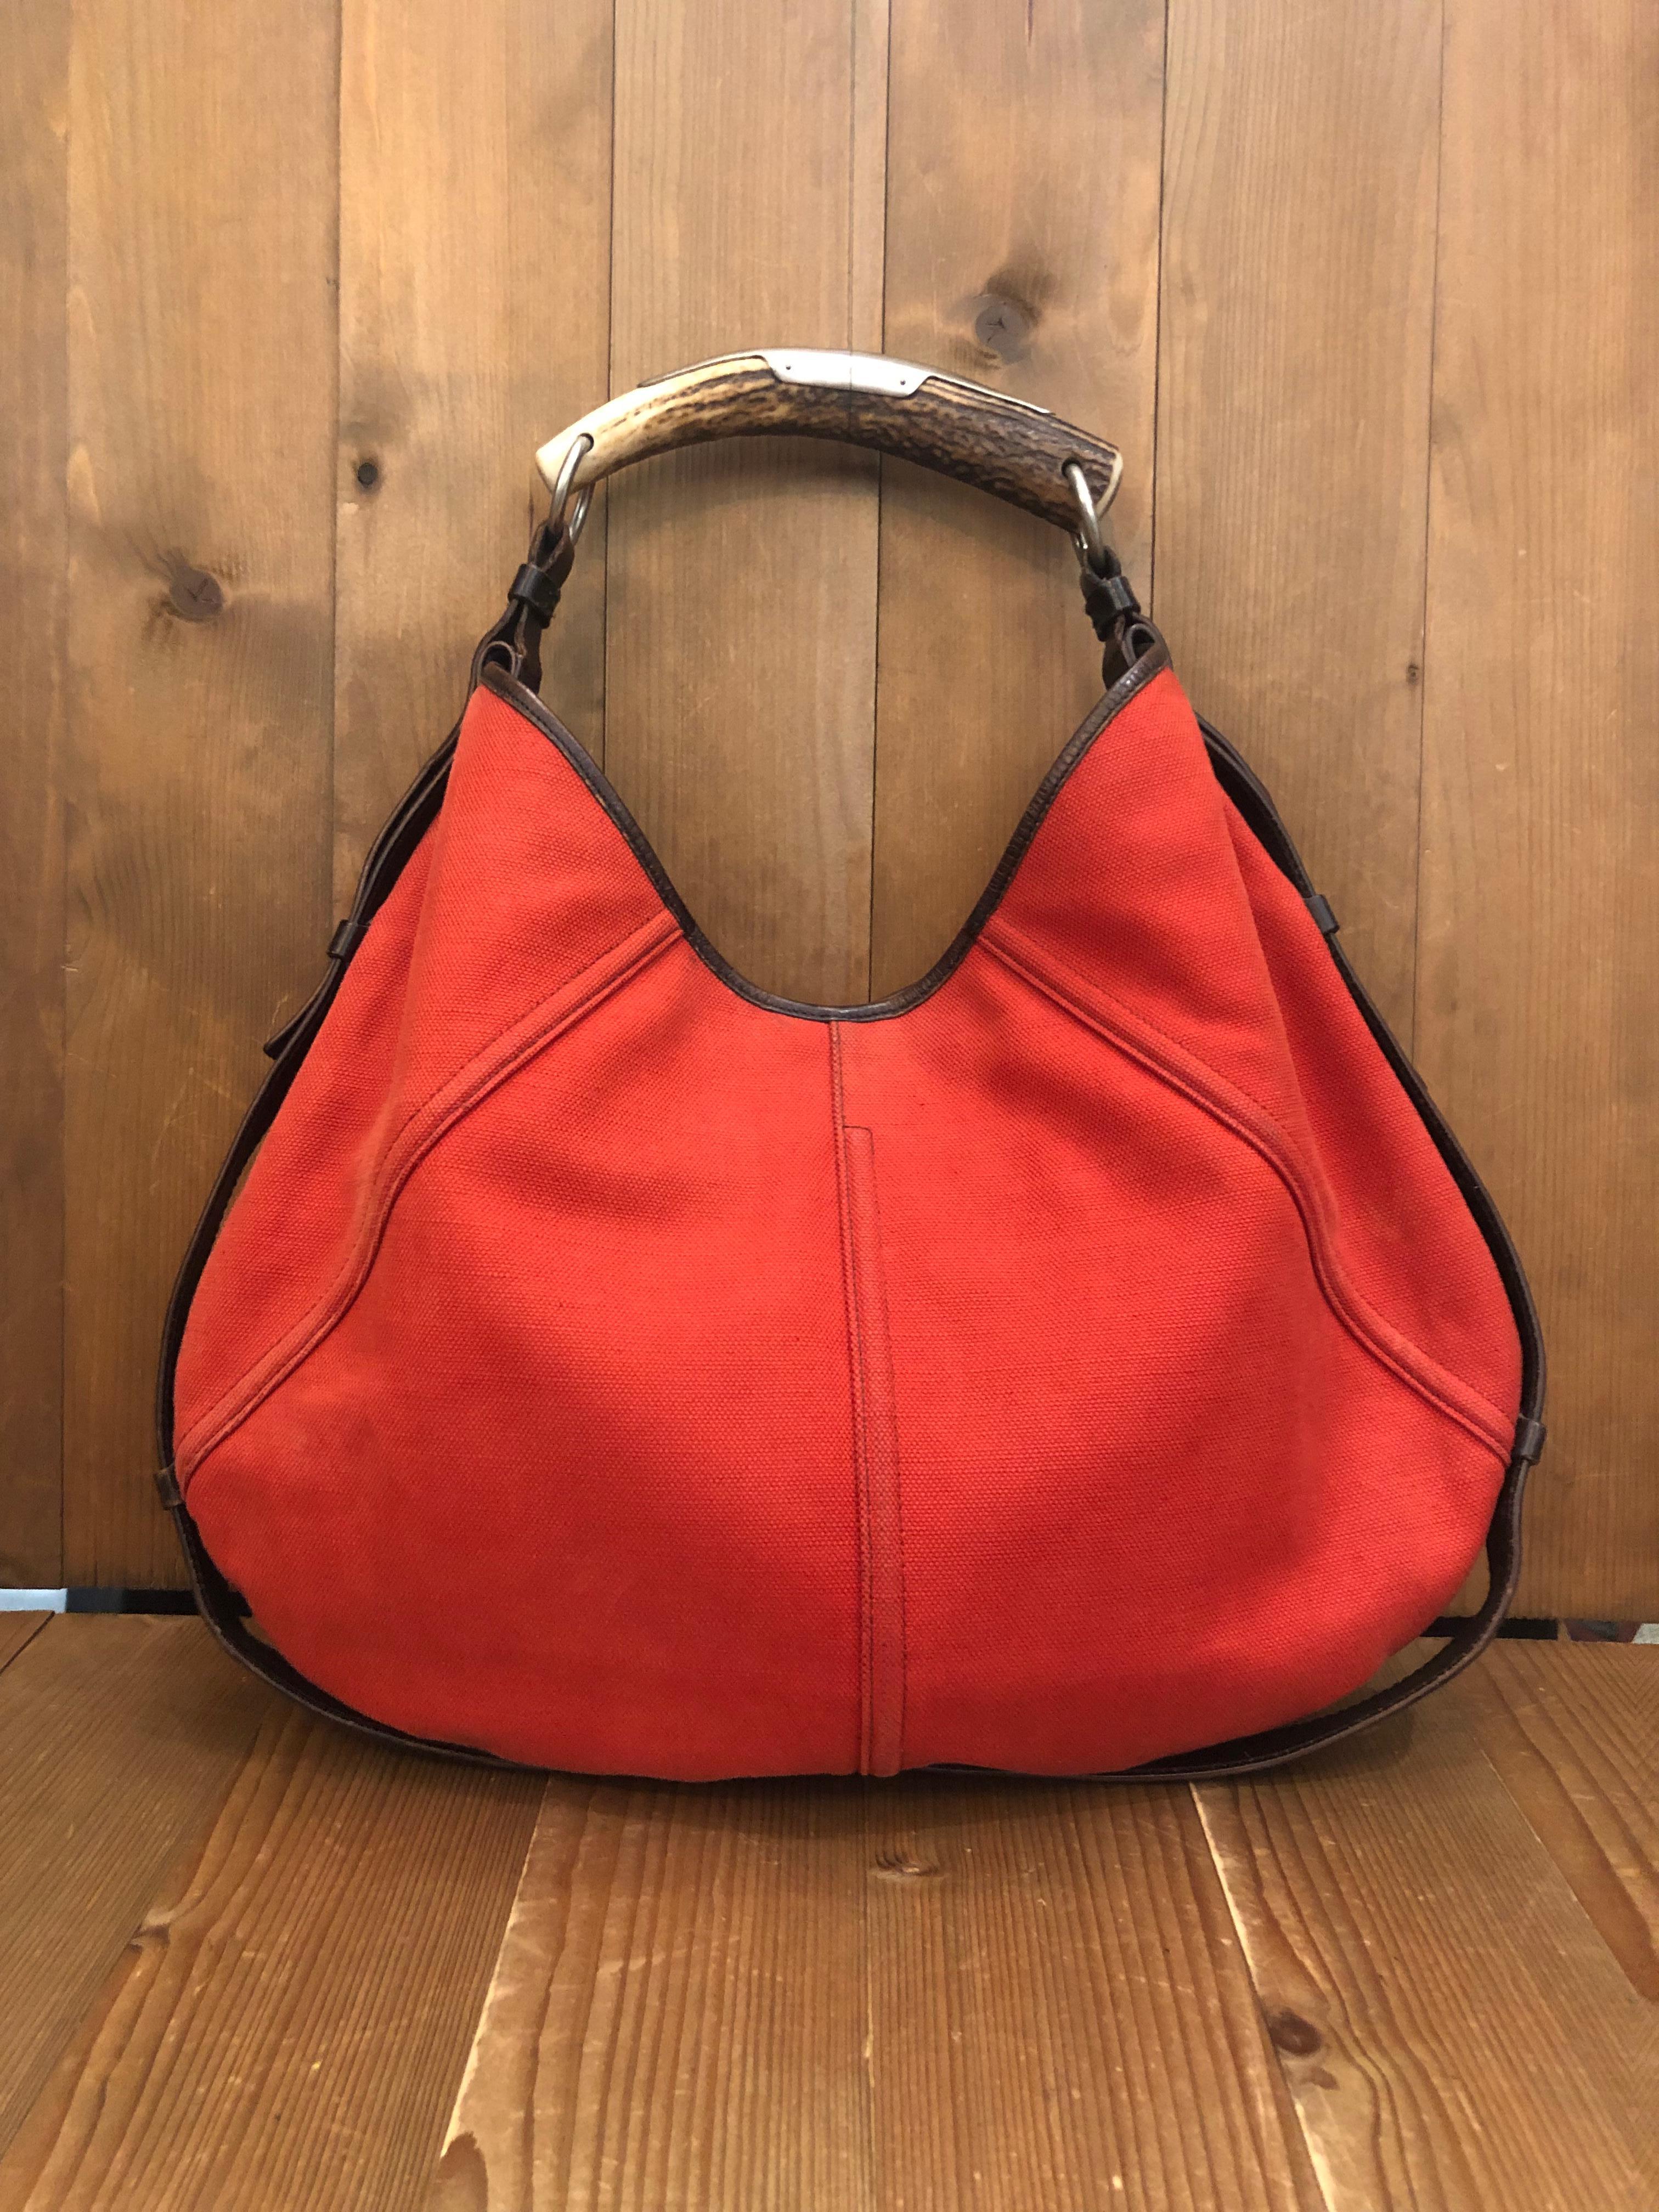 This iconic Yves Saint Laurent Mombasa hand bag from the 2000's Tom Ford era is crafted of canvas in orange and dark brown leather features a deer horn handle. Top magnetic snap closure opens to an un-lined orange canvas interior featuring one